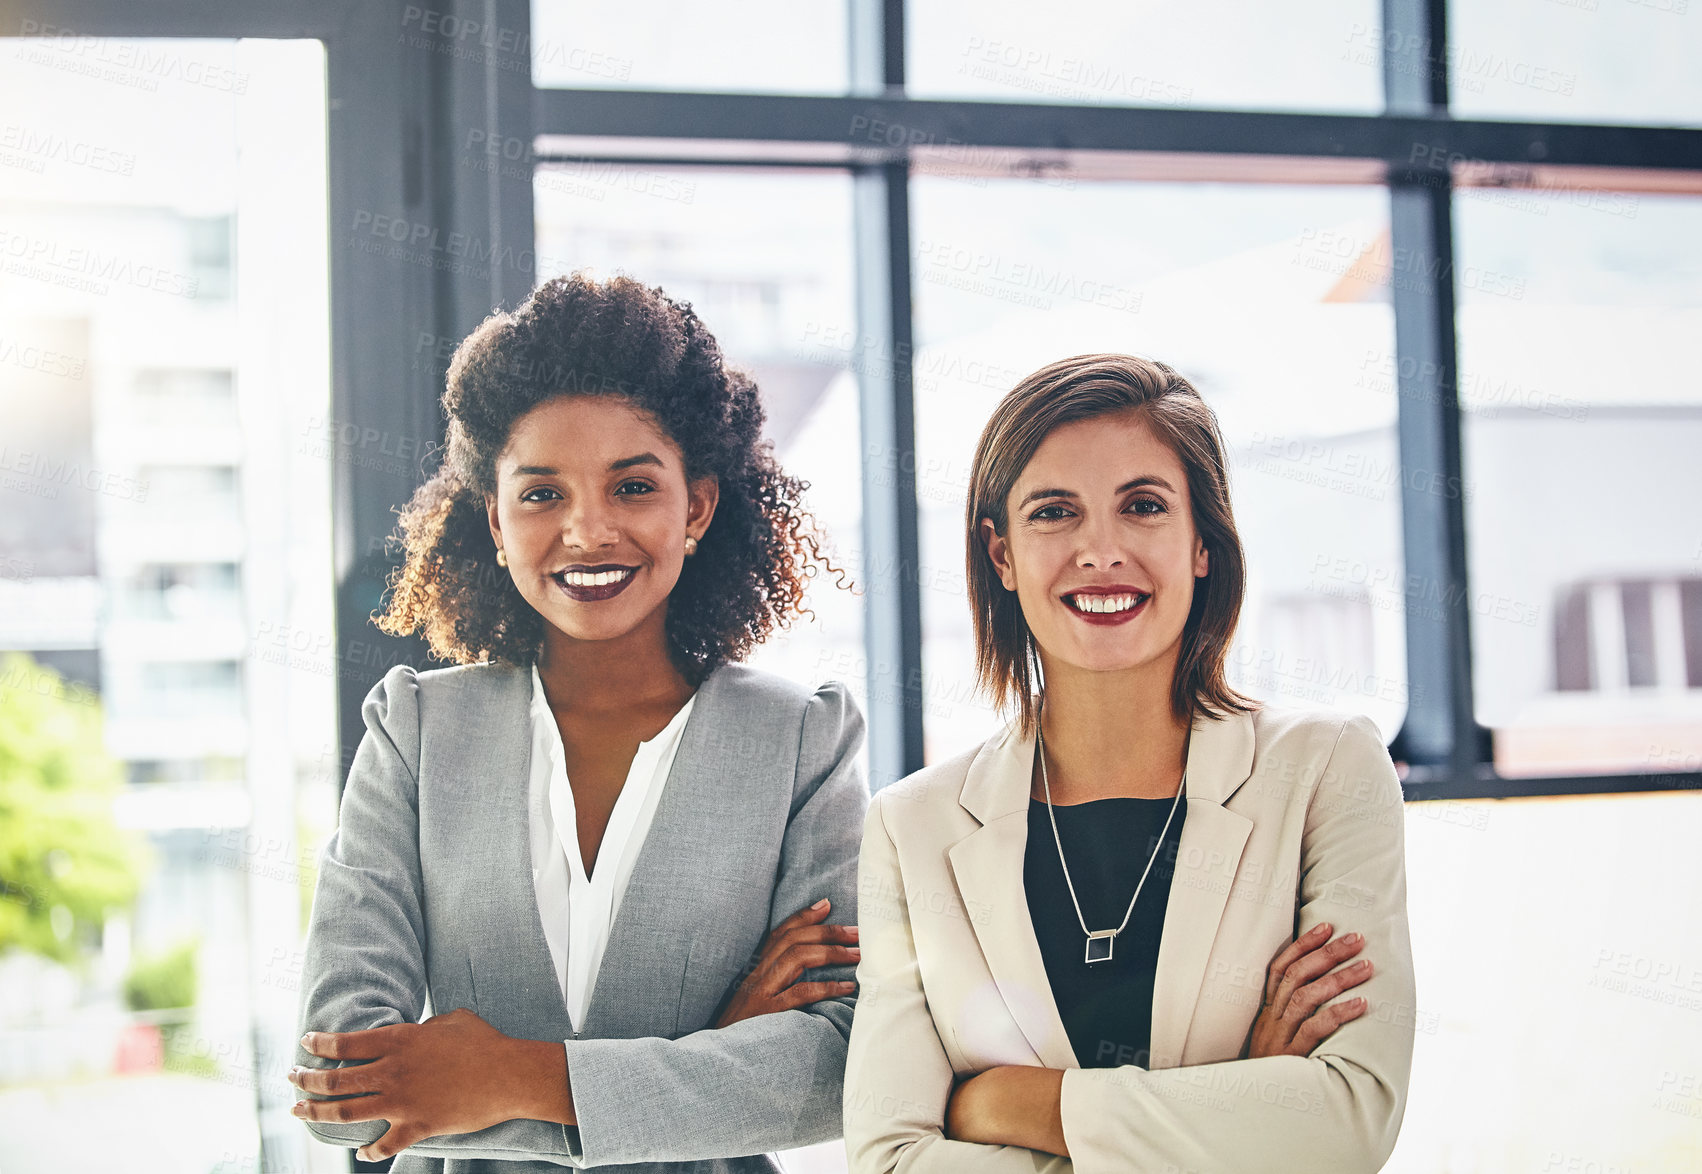 Buy stock photo Portrait of two confident young businesswomen standing together in an office